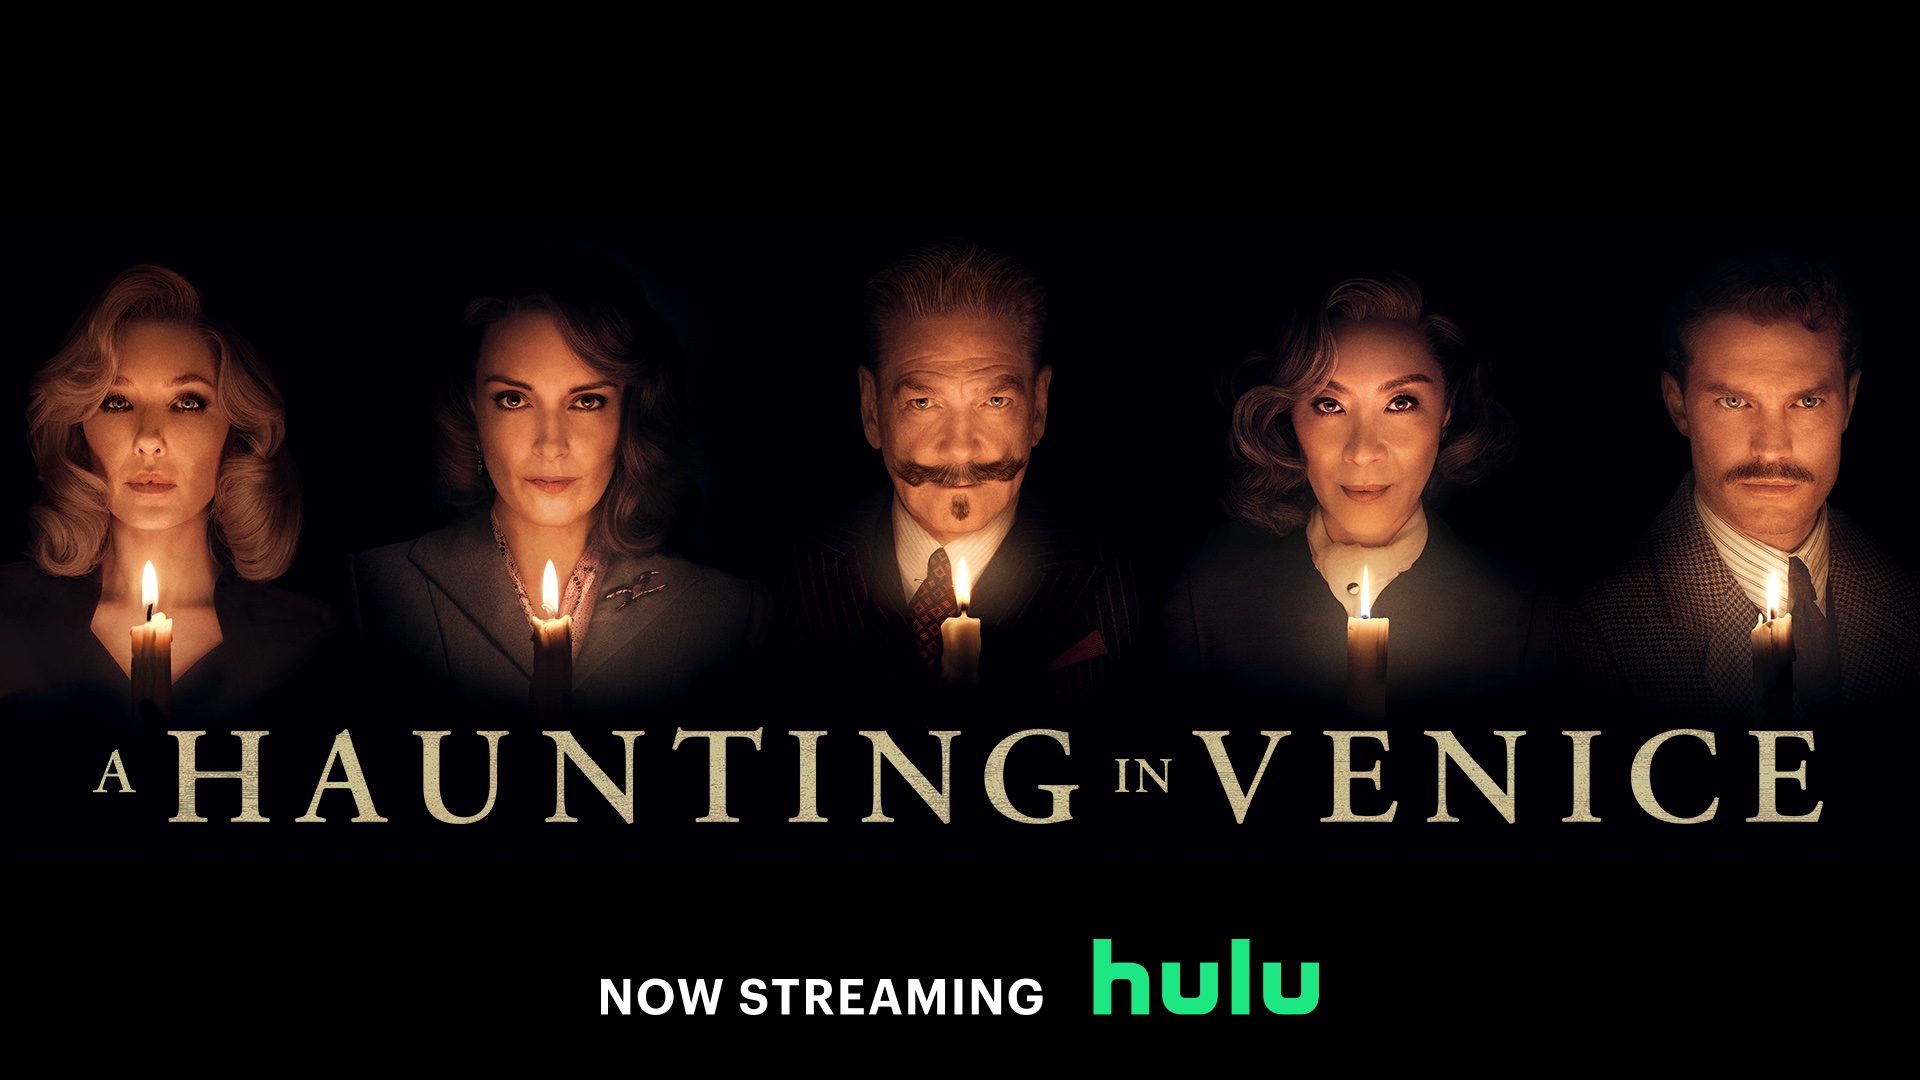 The characters of A Haunting in Venice stand in a row, all hidden by darkness except for their faces, which are illuminated by the orange glow of candles. Above their heads is the text “A Haunting in Venice, now streaming on Hulu.”